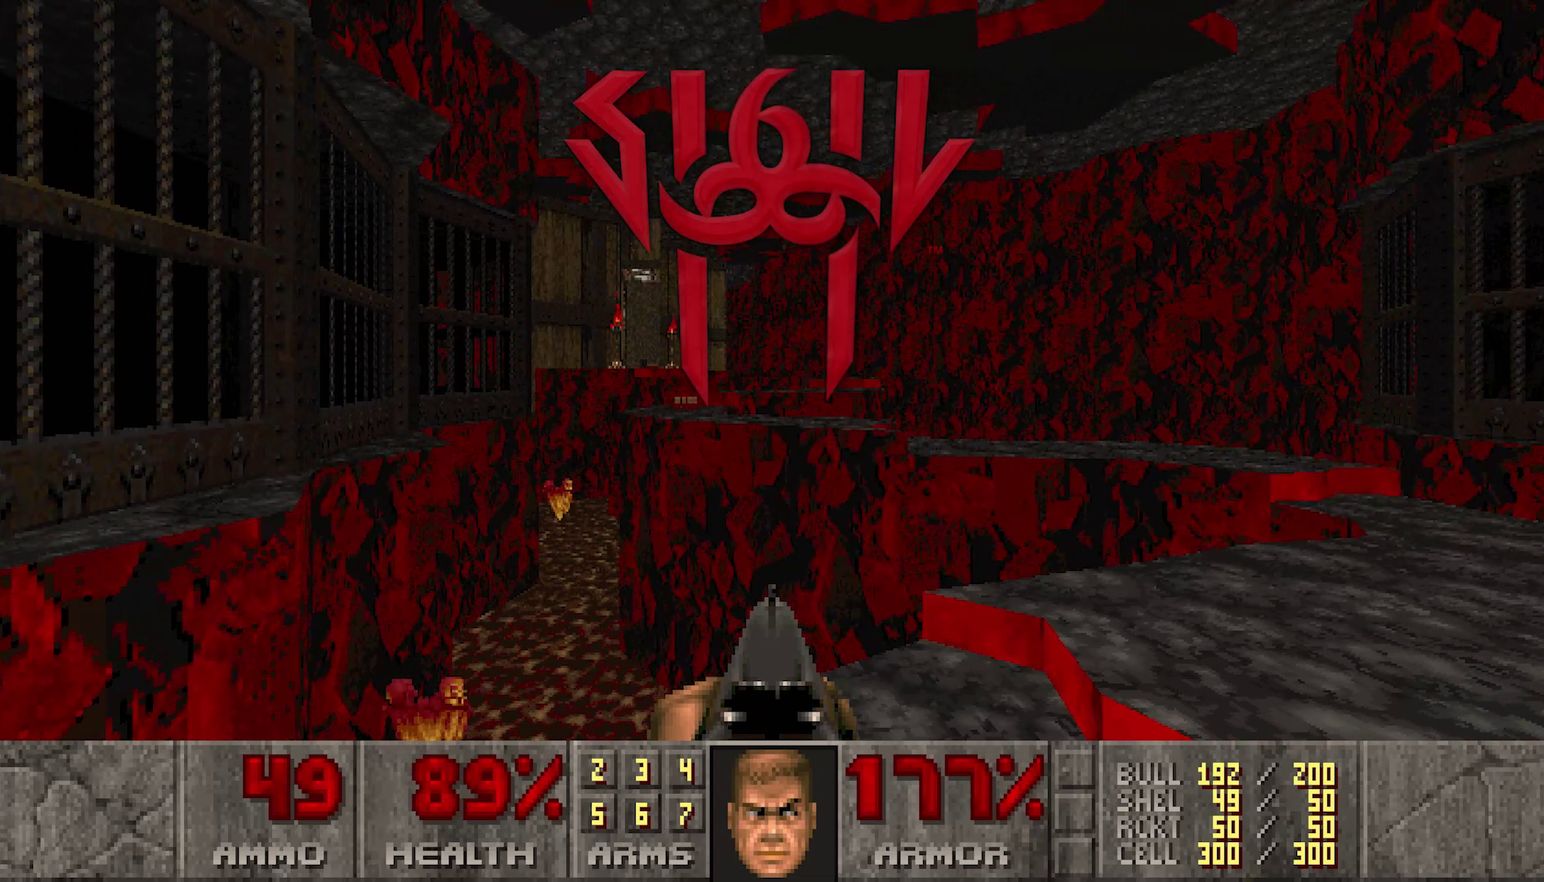 SIGIL II is available now as a free Add-on for DOOM (1993) and DOOM II